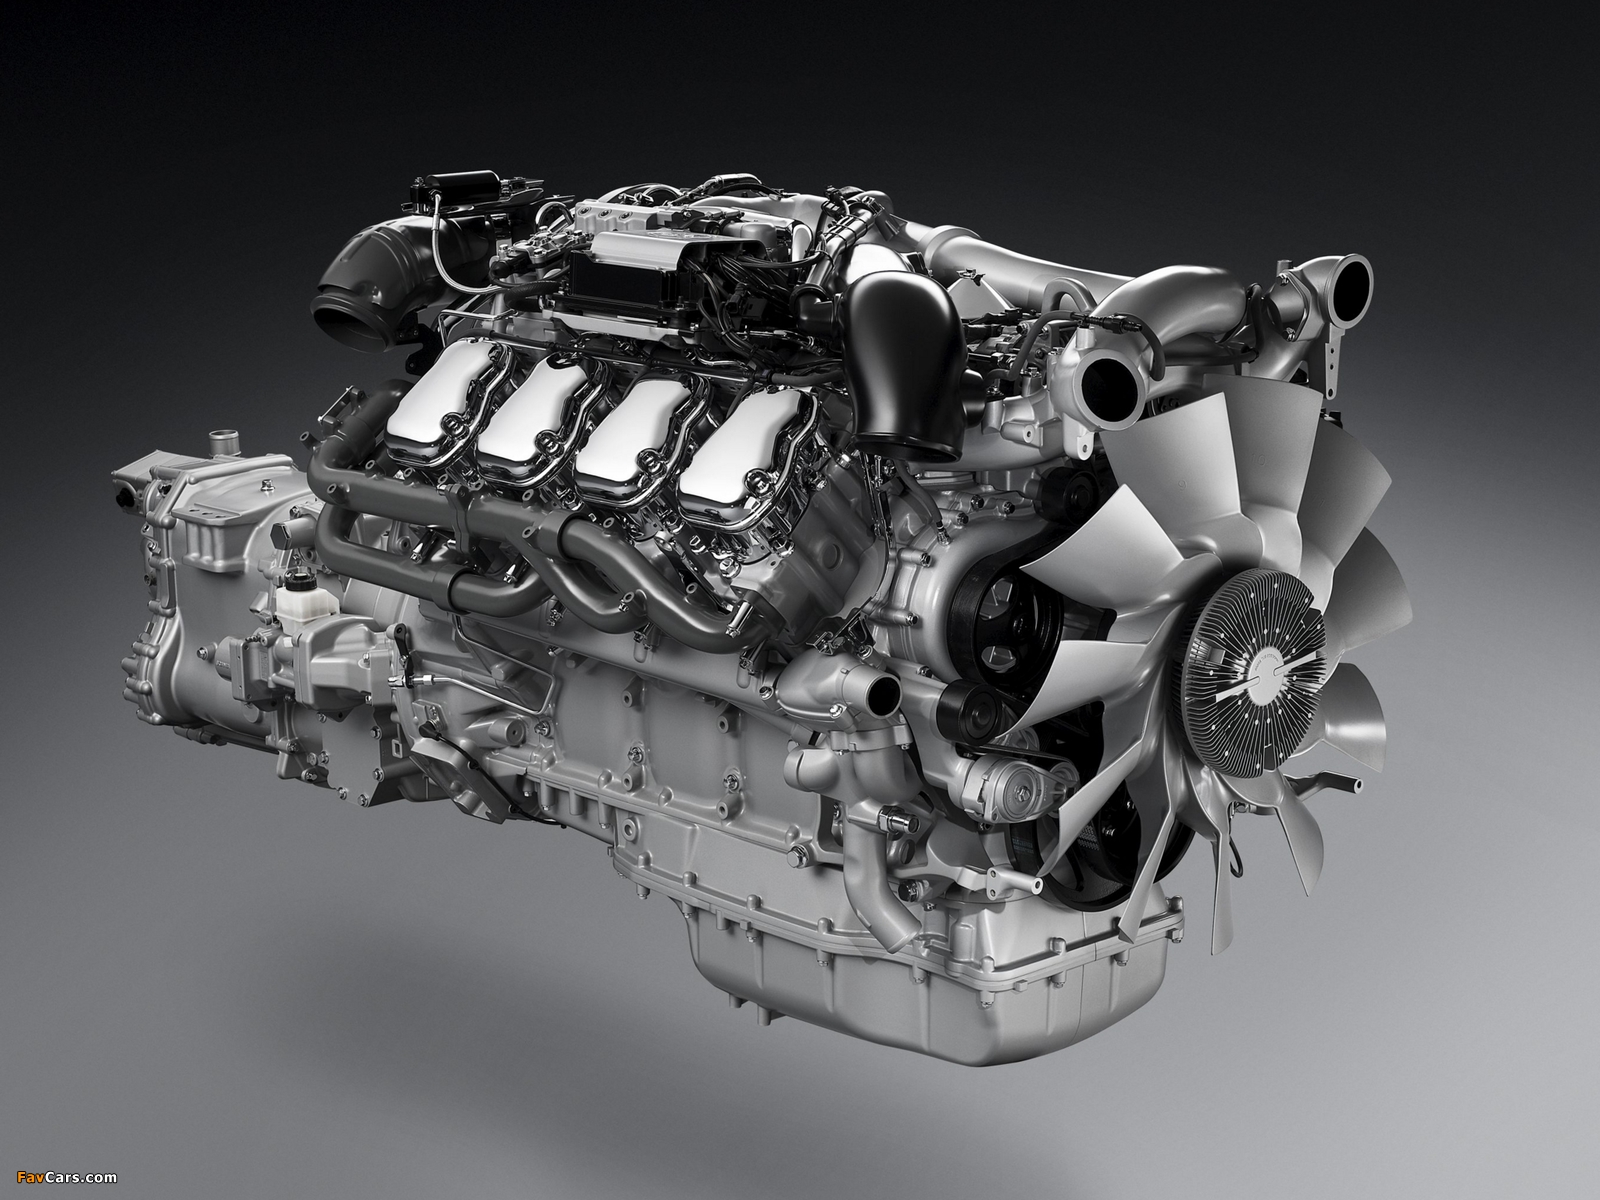 Images of Engines  Scania 730 hp 16.4-litre Euro 5 (1600 x 1200)